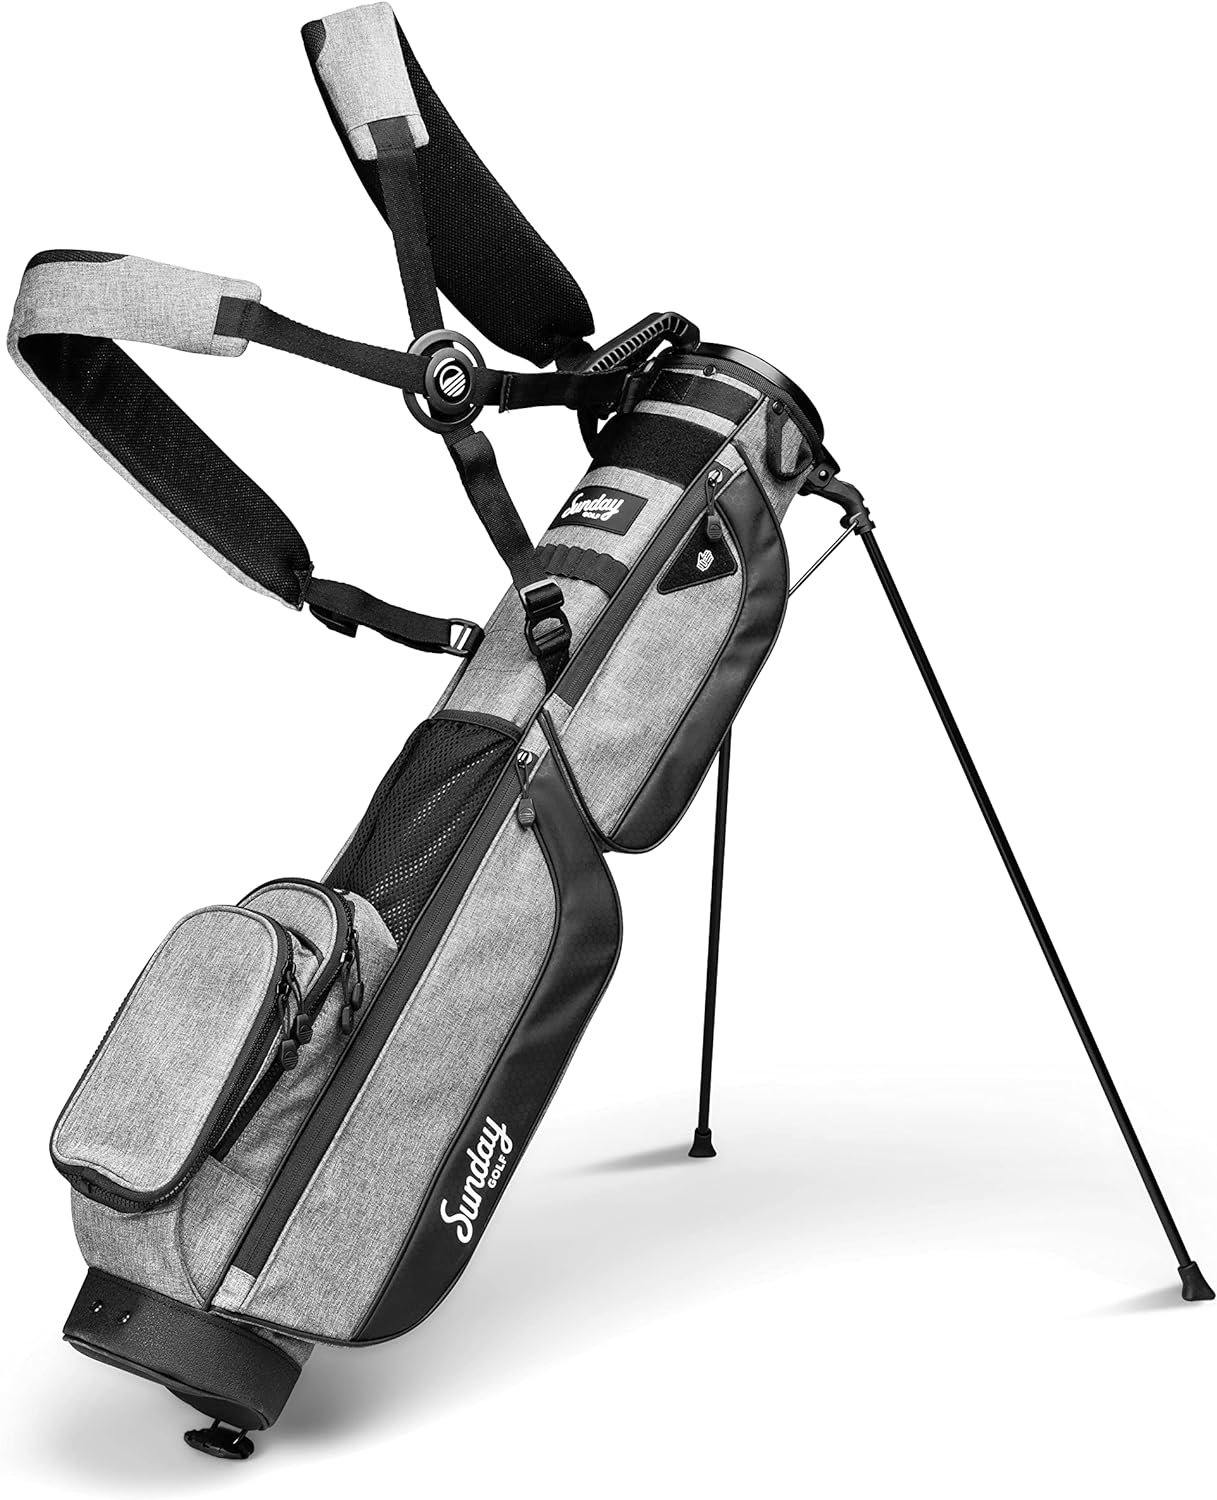 Sunday Golf Loma XL Bag - Lightweight Sunday Golf Bag with Strap and Stand – Easy to Carry Pitch n Putt Golf Bag – Golf Stand Bag for The Driving Range, Par 3 and Executive Courses, 3.4 pounds